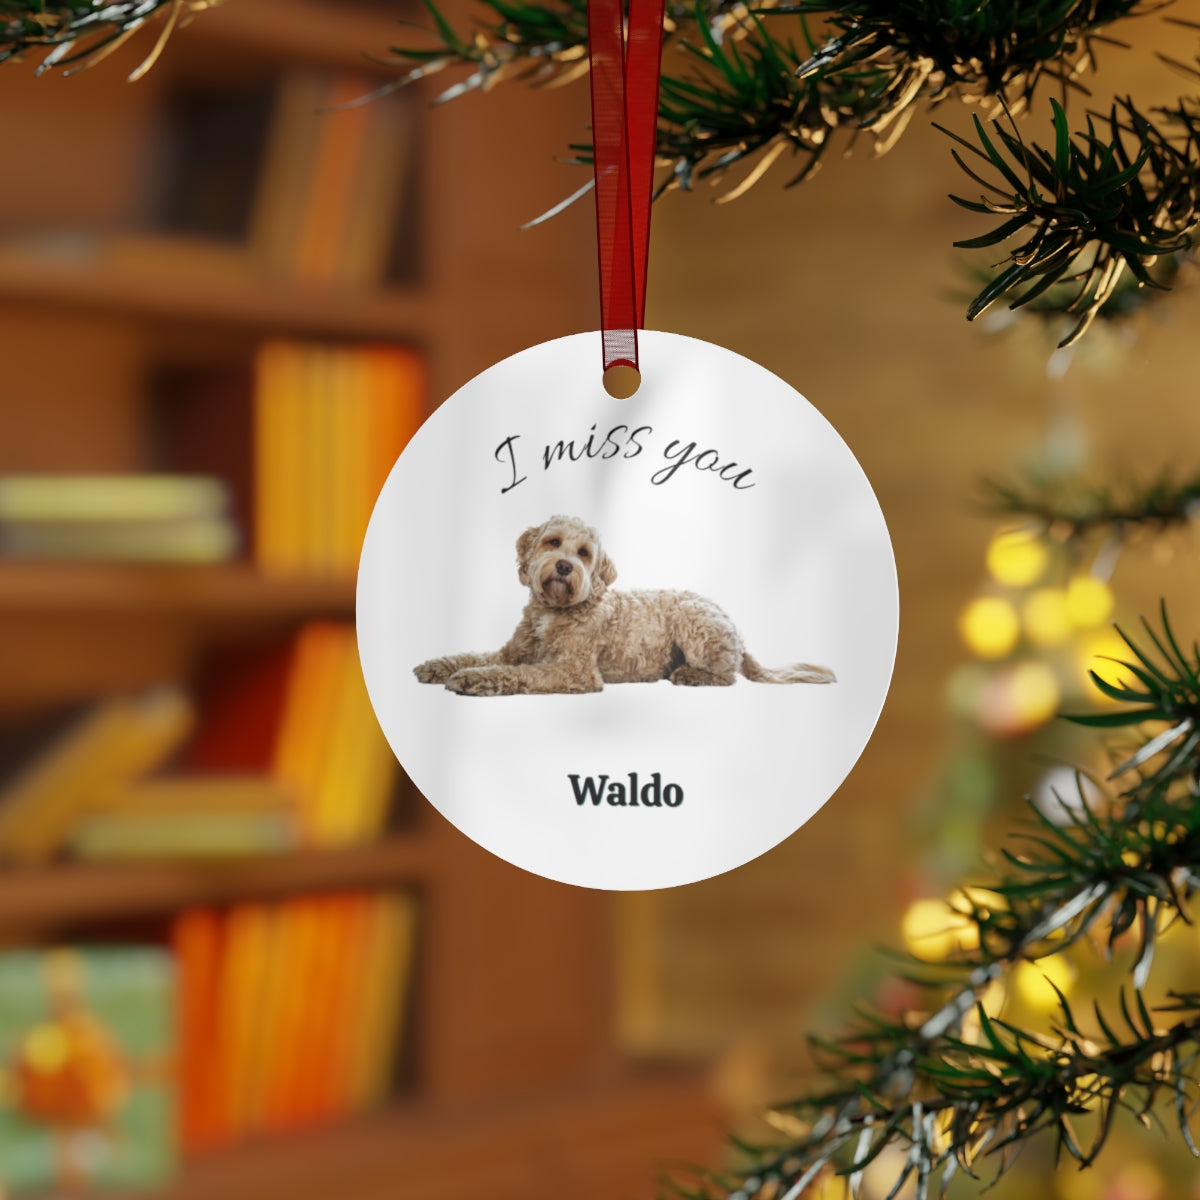 Personalized Pet Ornament with Photo